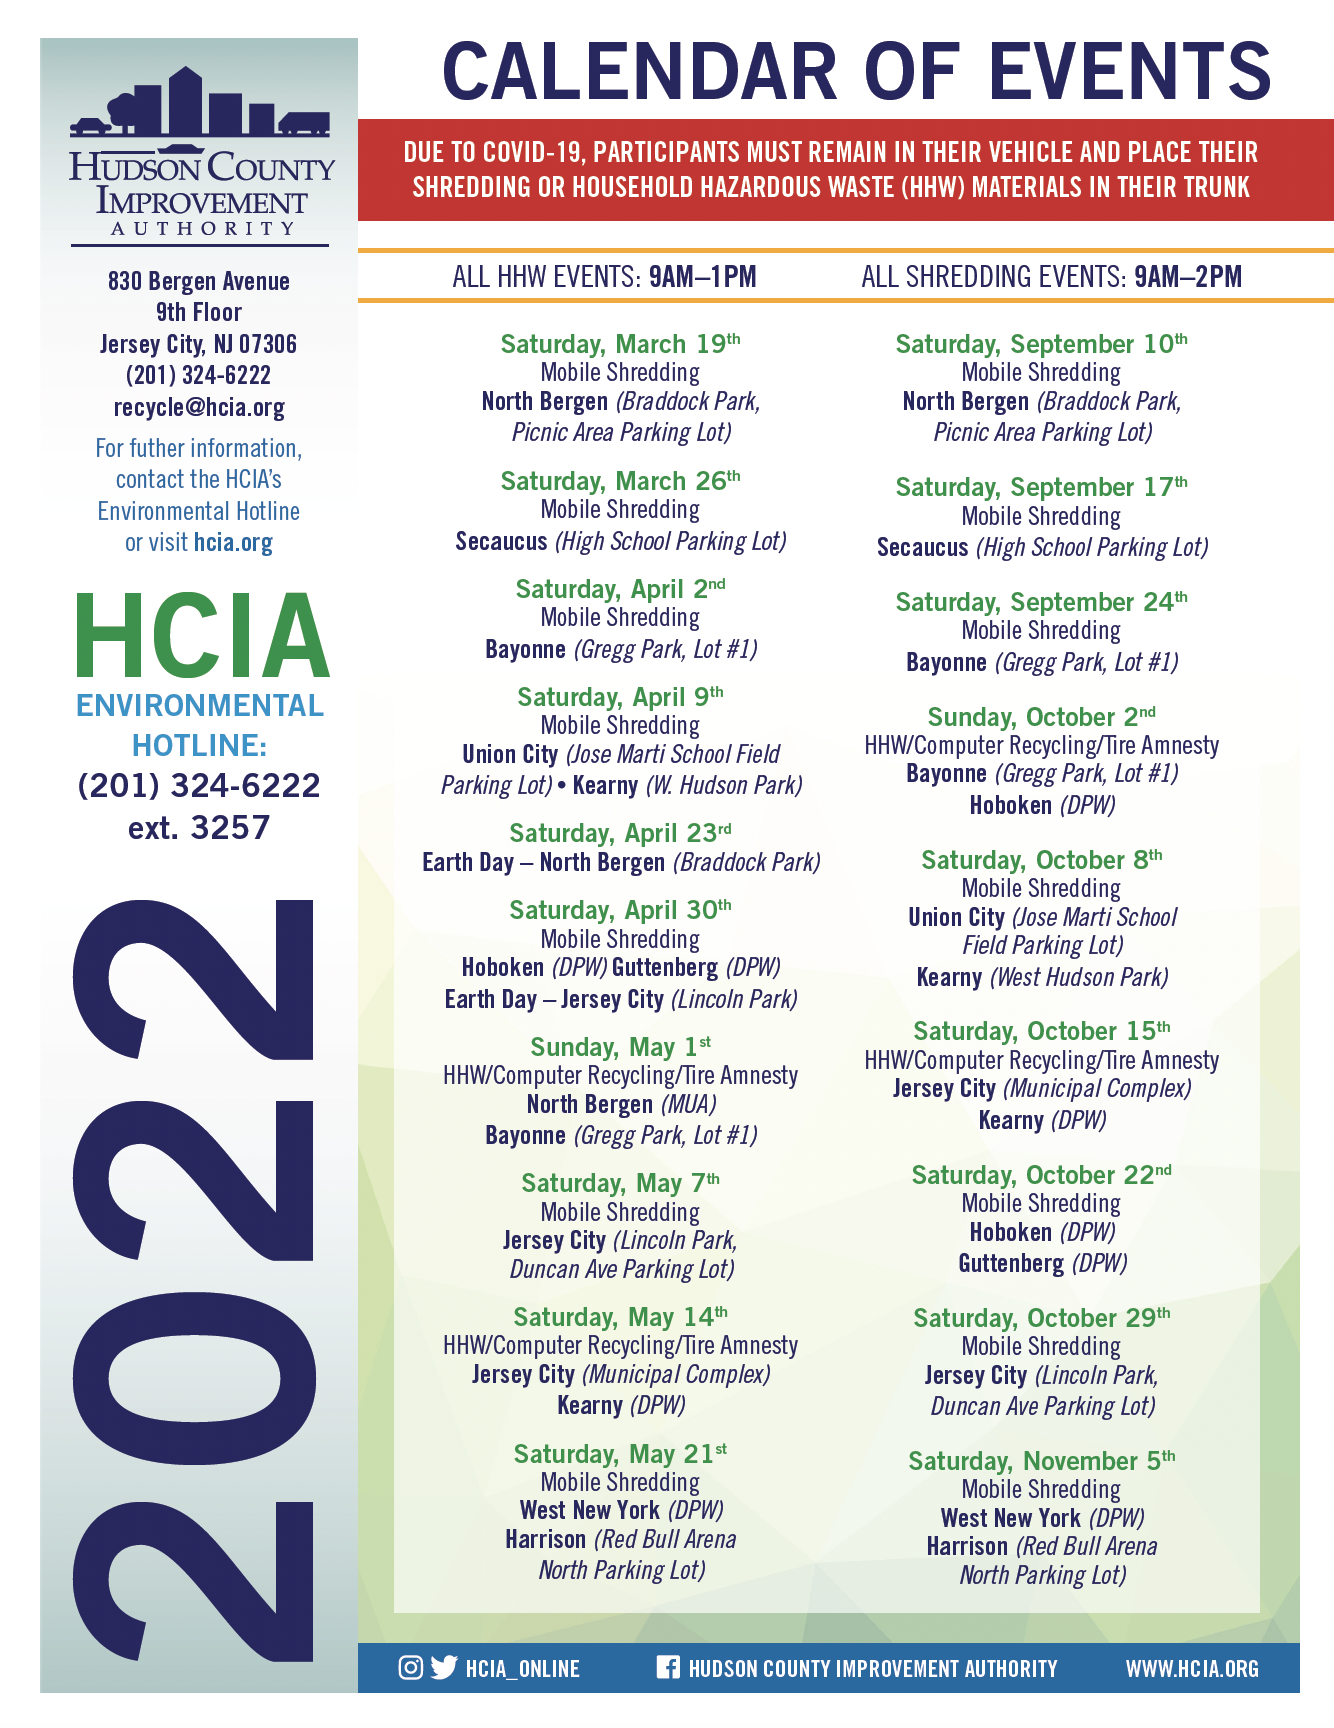 HCIA Upcoming Events Flyer